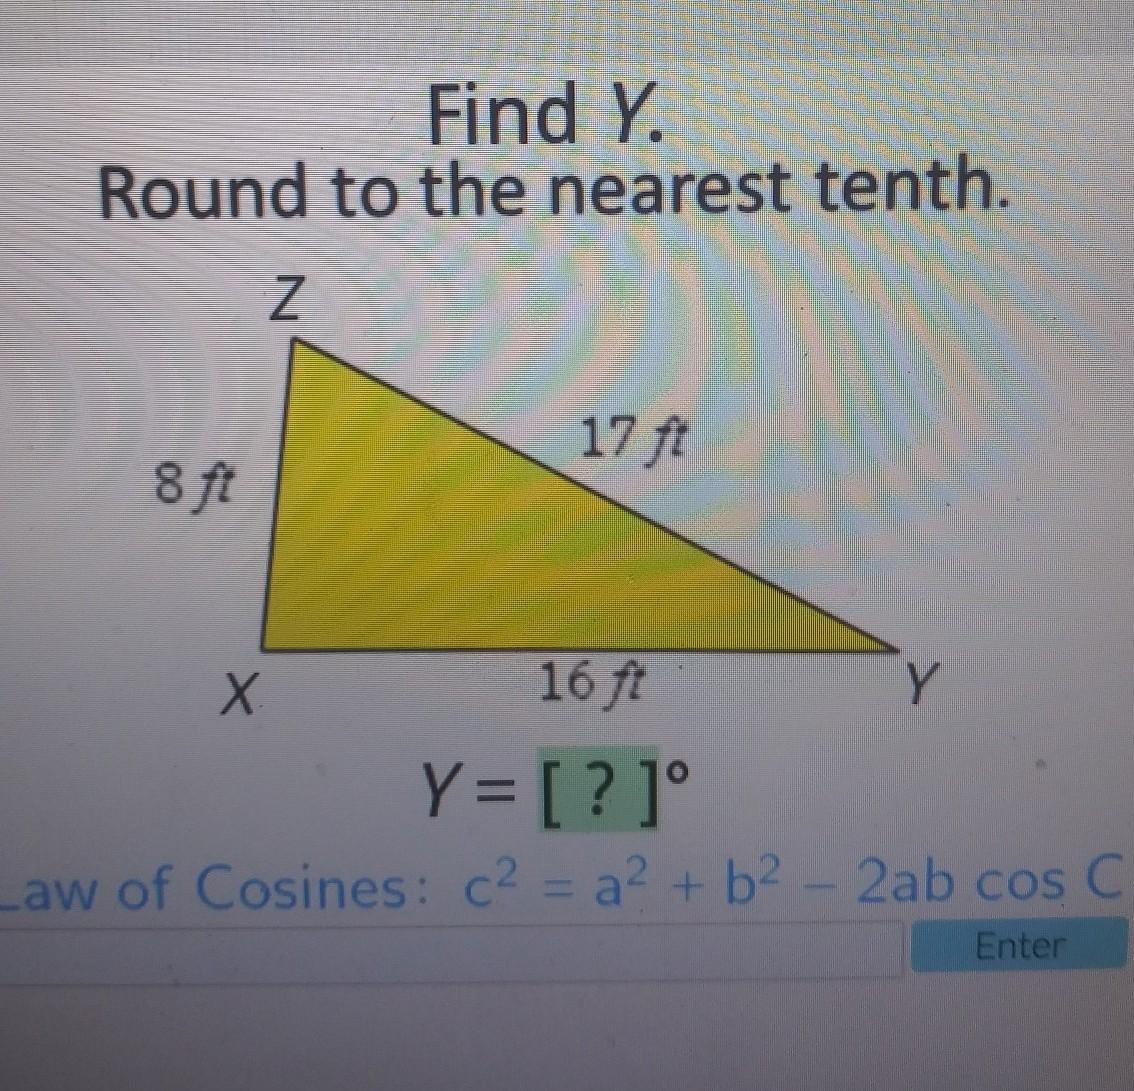 Find Y. Round To The Nearest Tenth. Z 17 Ft 8 Ft X 16 Ft Y Y= [?] Law Of Cosines: C2 = A + B2 - 2ab Cos